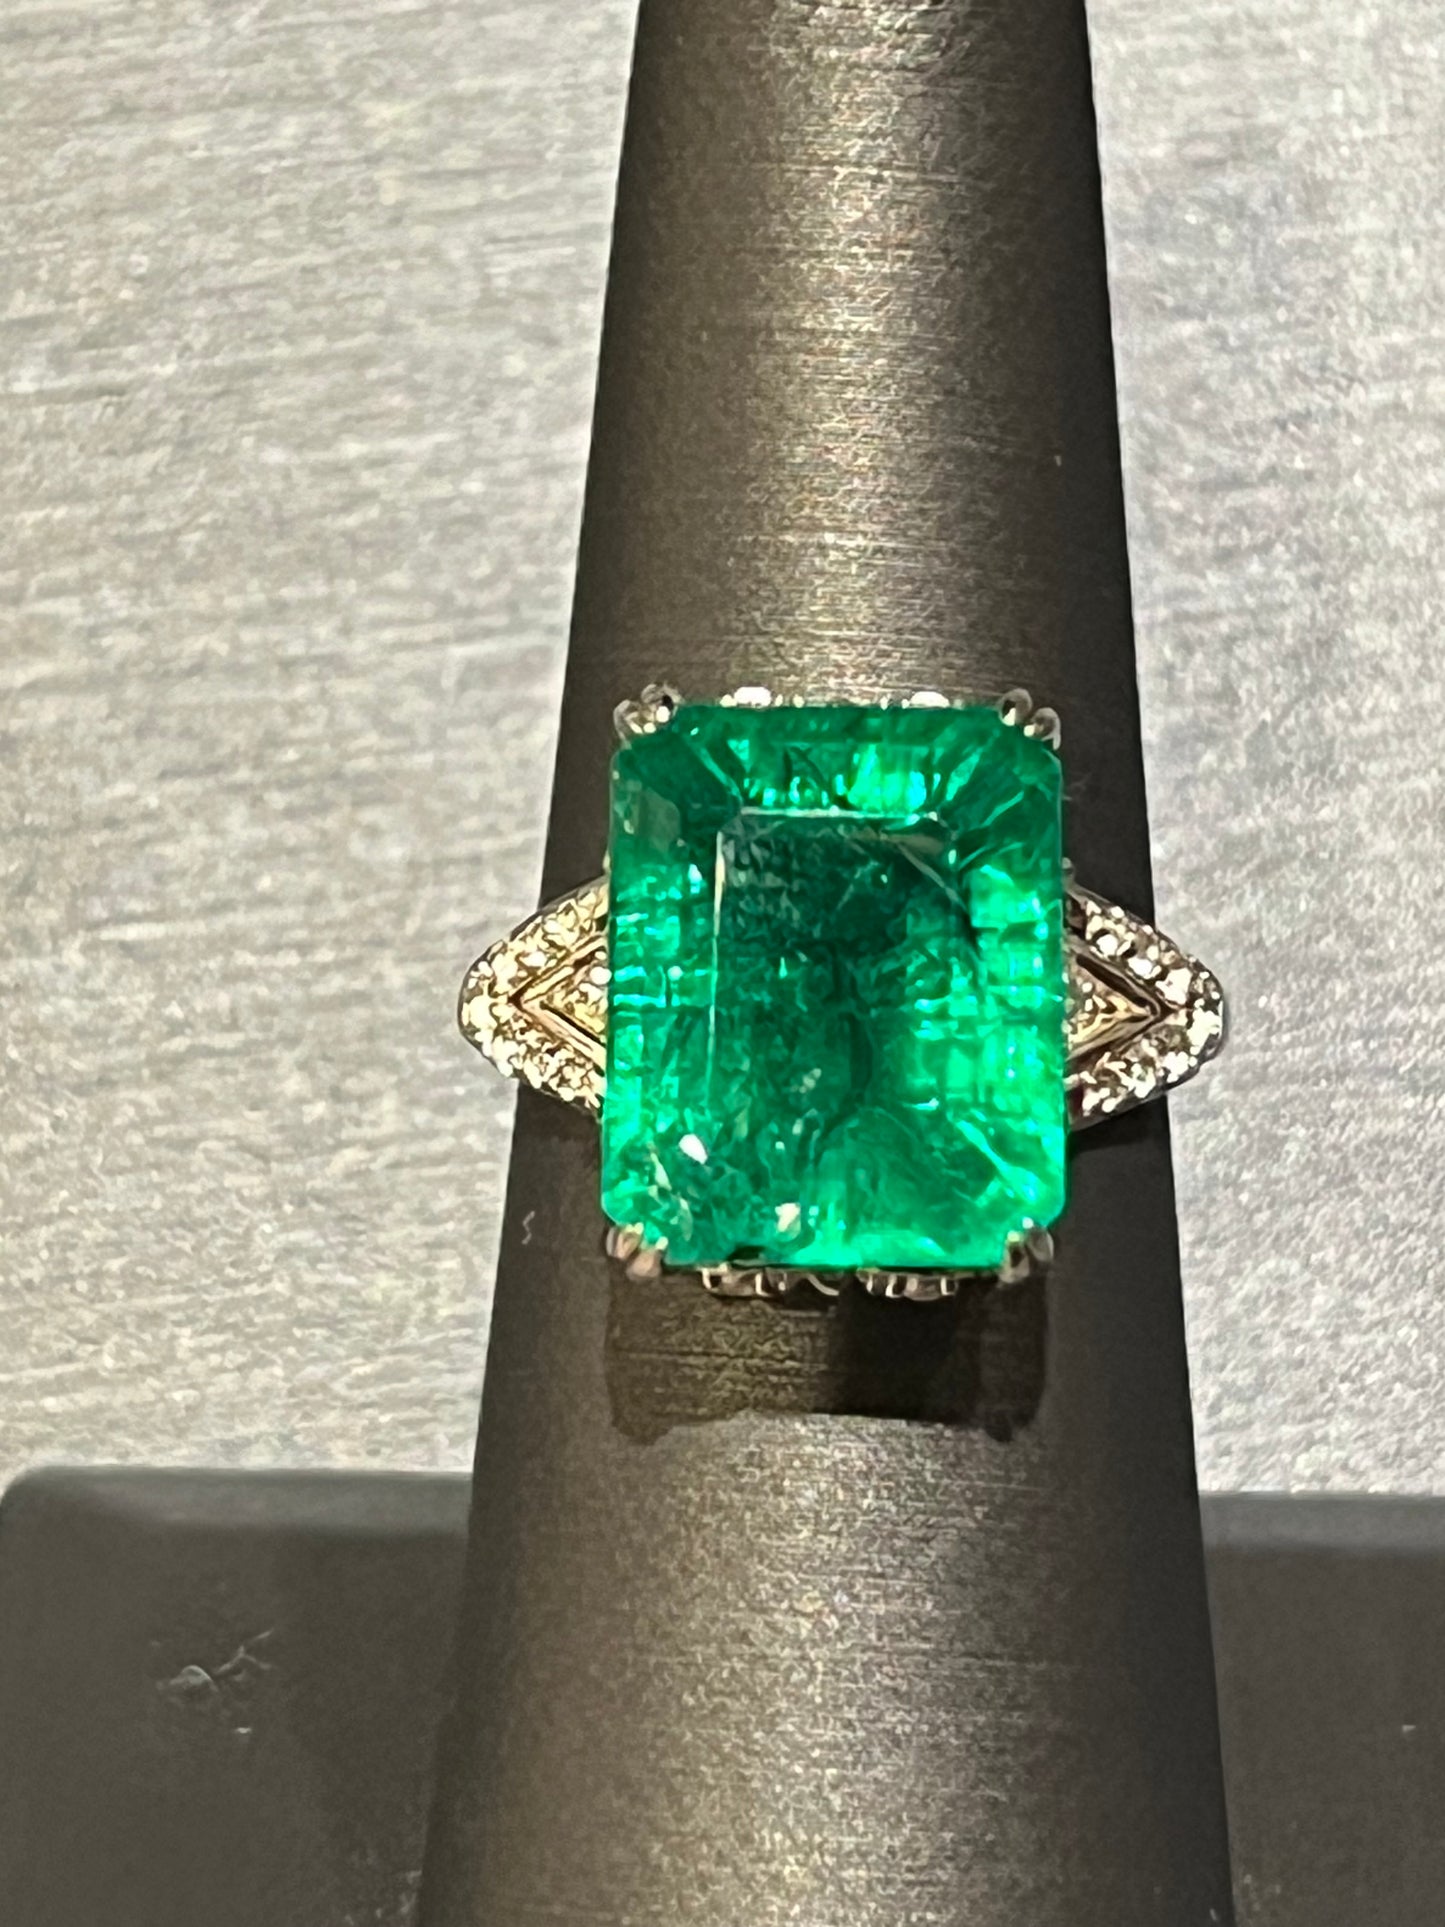 Sterling silver ring with 10.52ct Emerald (lab grown) and White Topaz. Includes certificate.